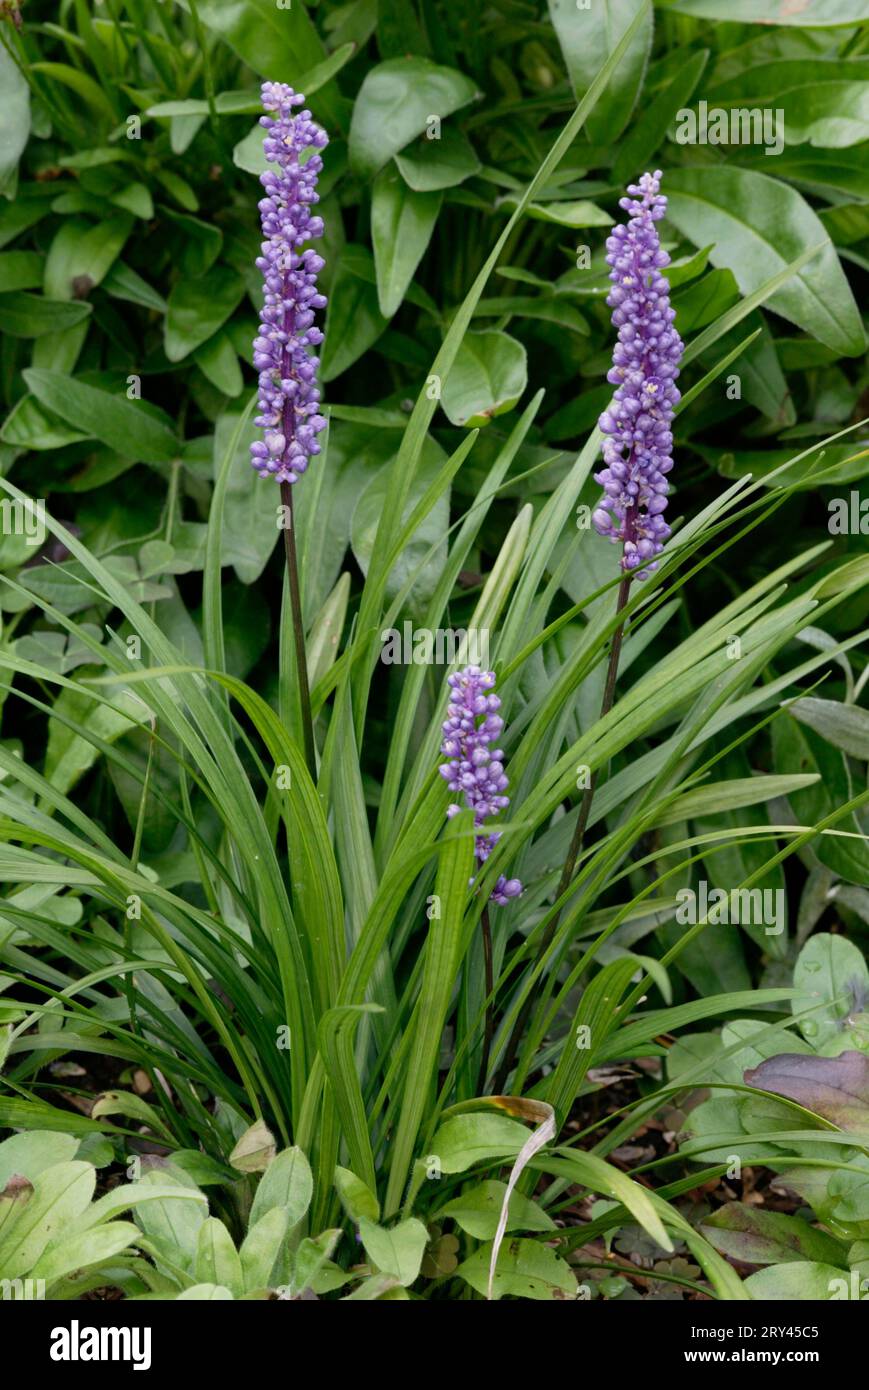 Lilyturf (Liriope muscari), lily, flowers, garden plants, lily family, Liliaceae, purple, vertical, flowering Stock Photo